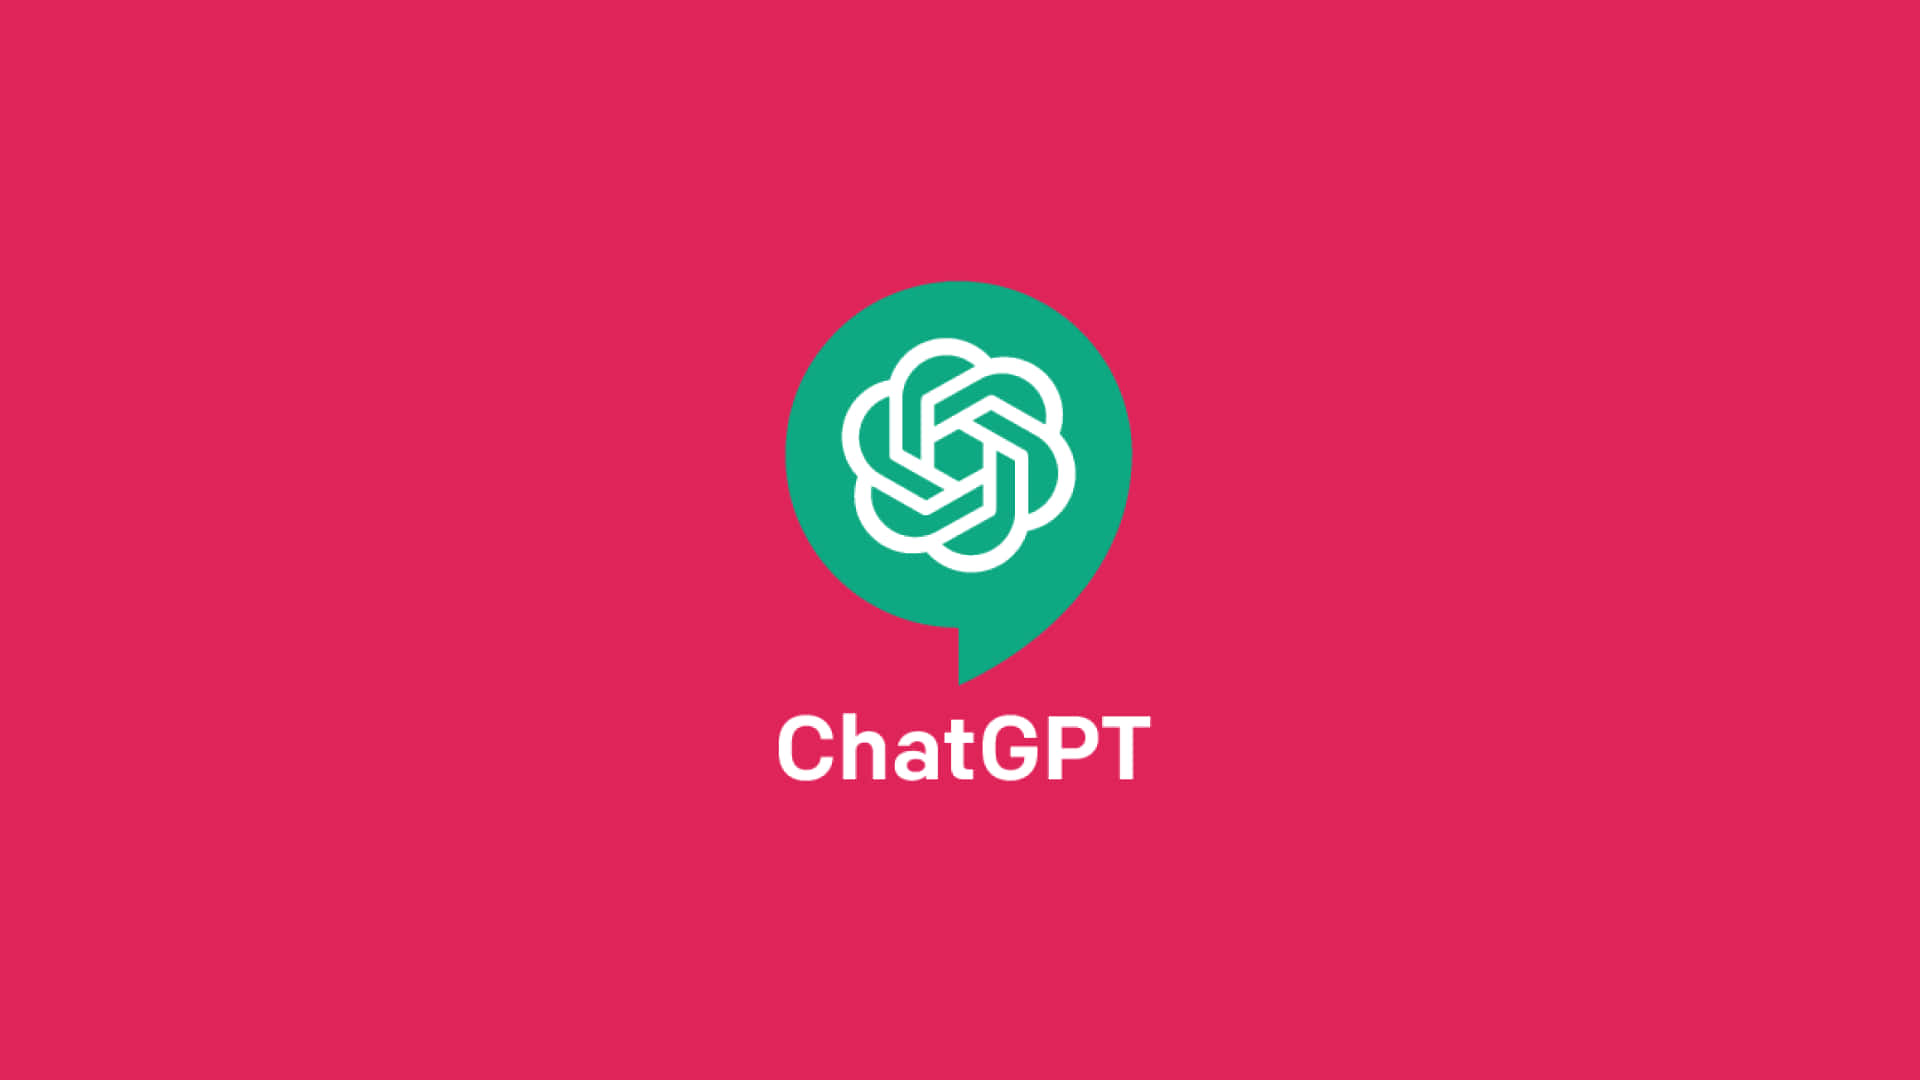 Chatgpt Logo On A Pink Background Wallpaper